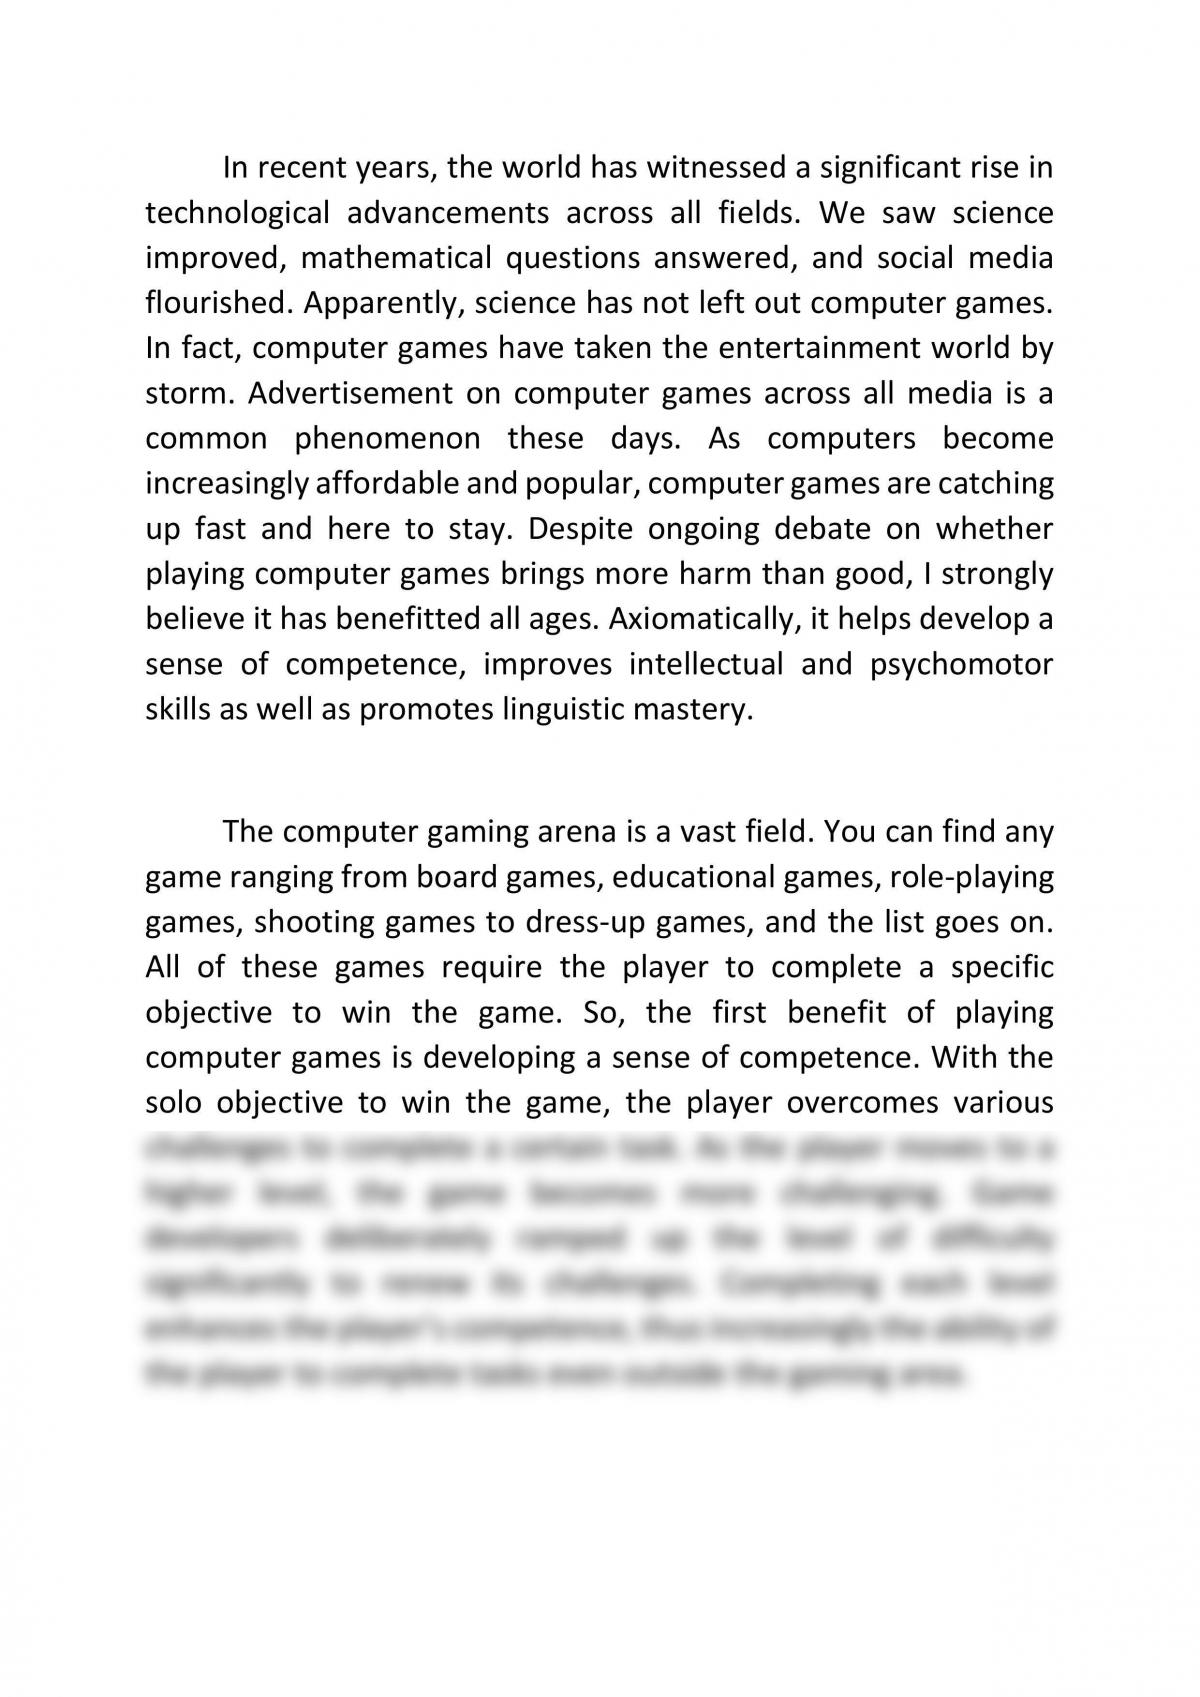 persuasive essay about computer games